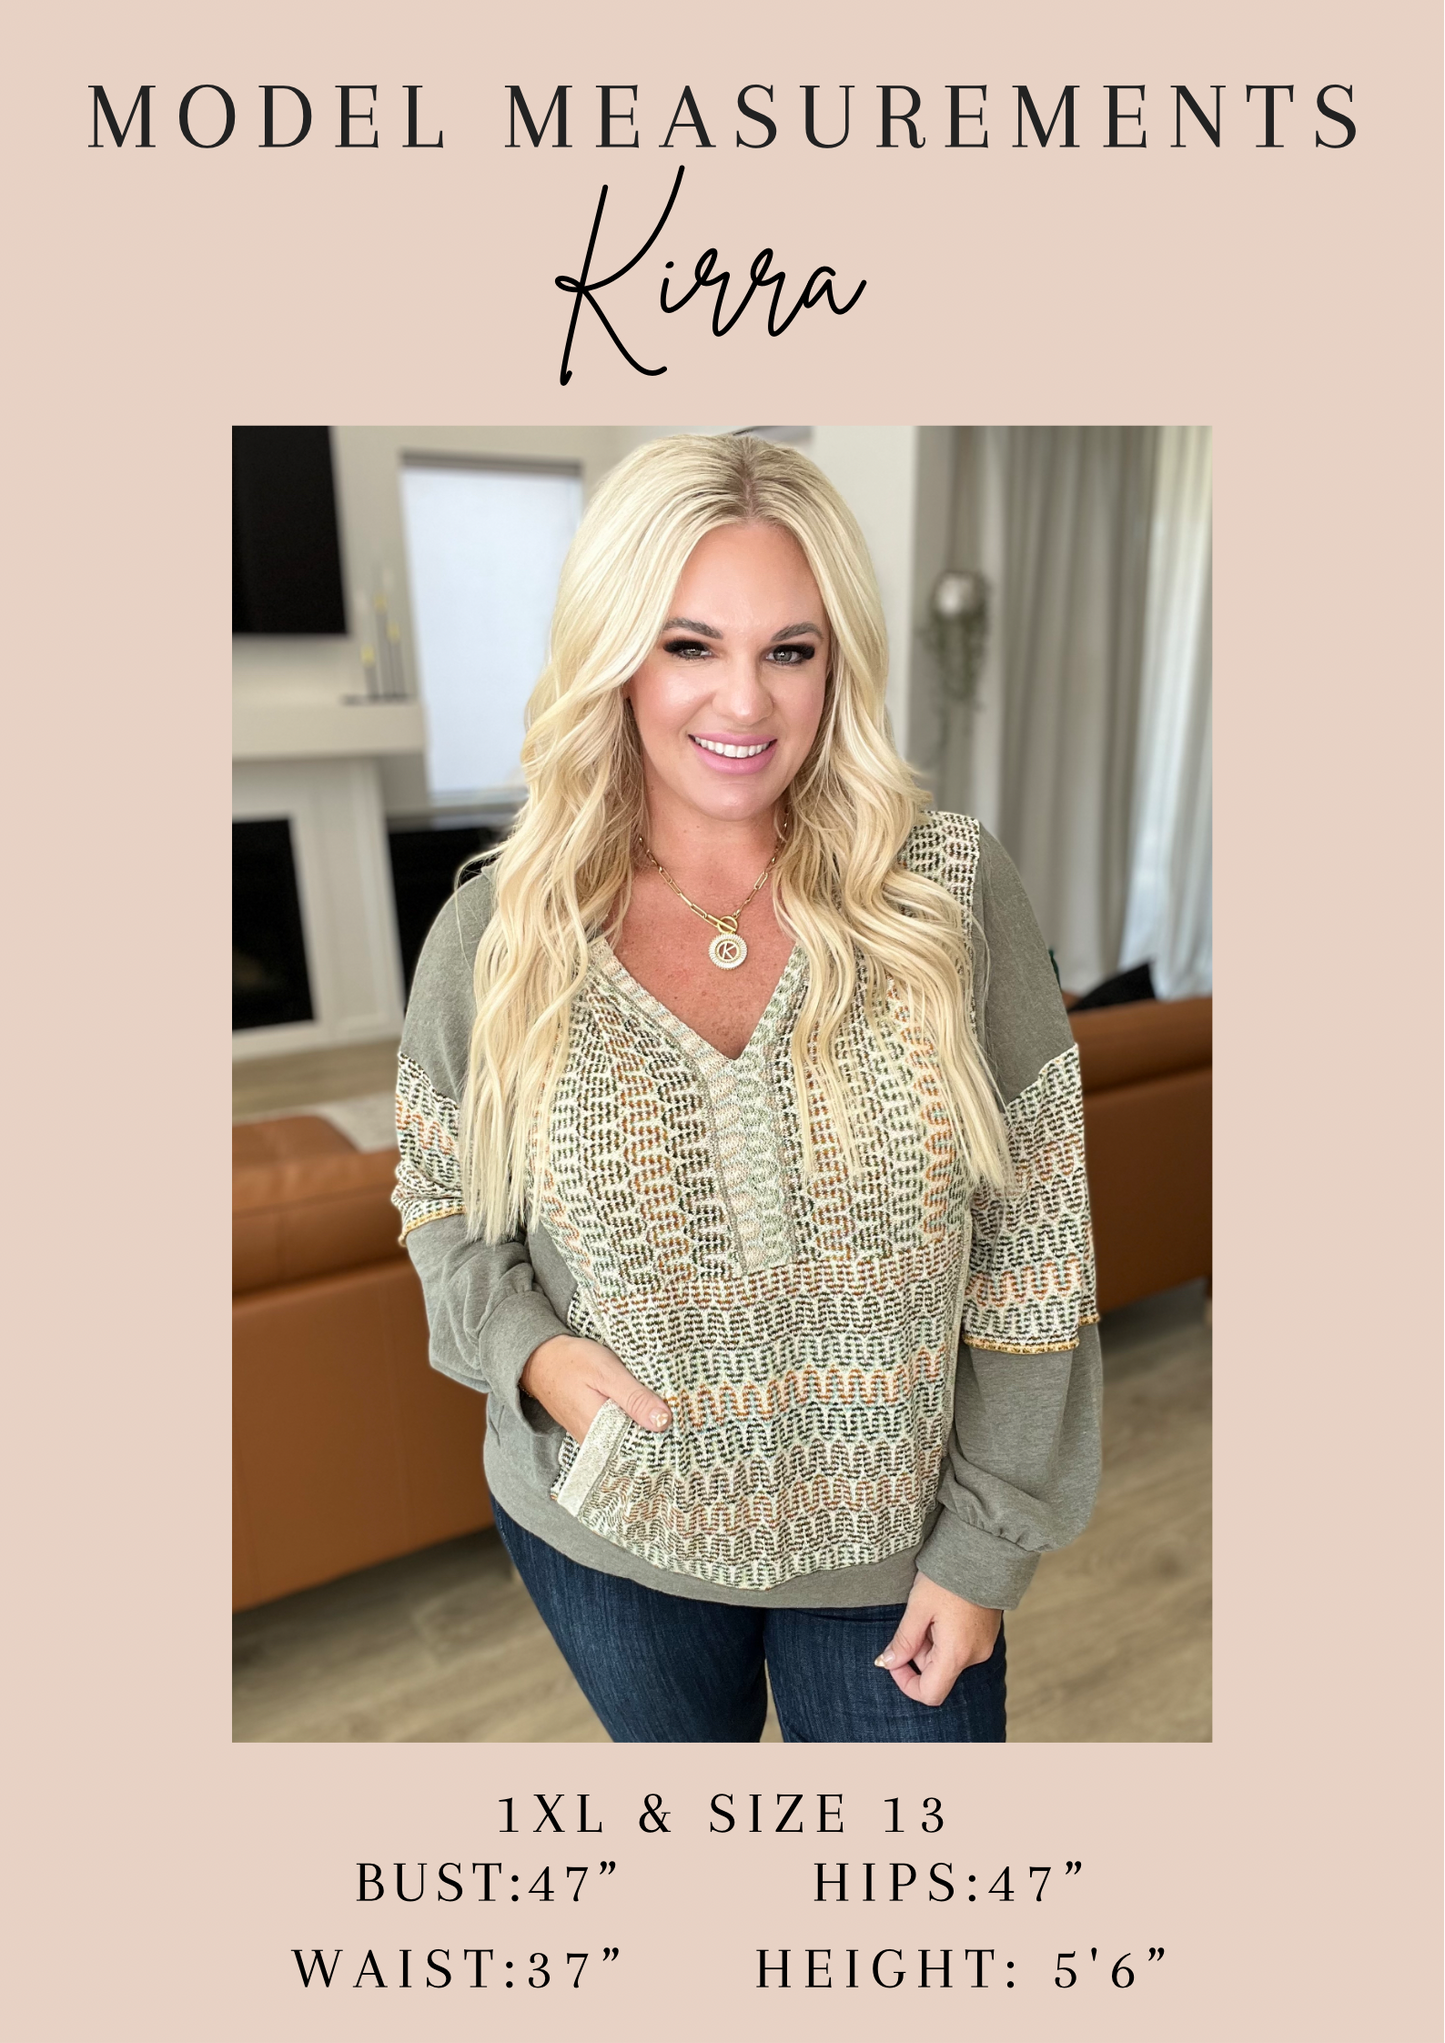 This After Yoga Cocoon Cardigan is the perfect athleisurewear must-have: its buttery soft material envelops you in a cozy cocoon shape with conveniently placed scooped pockets. Stay comfortable and stylish in this easy and soft layer. S - 3X